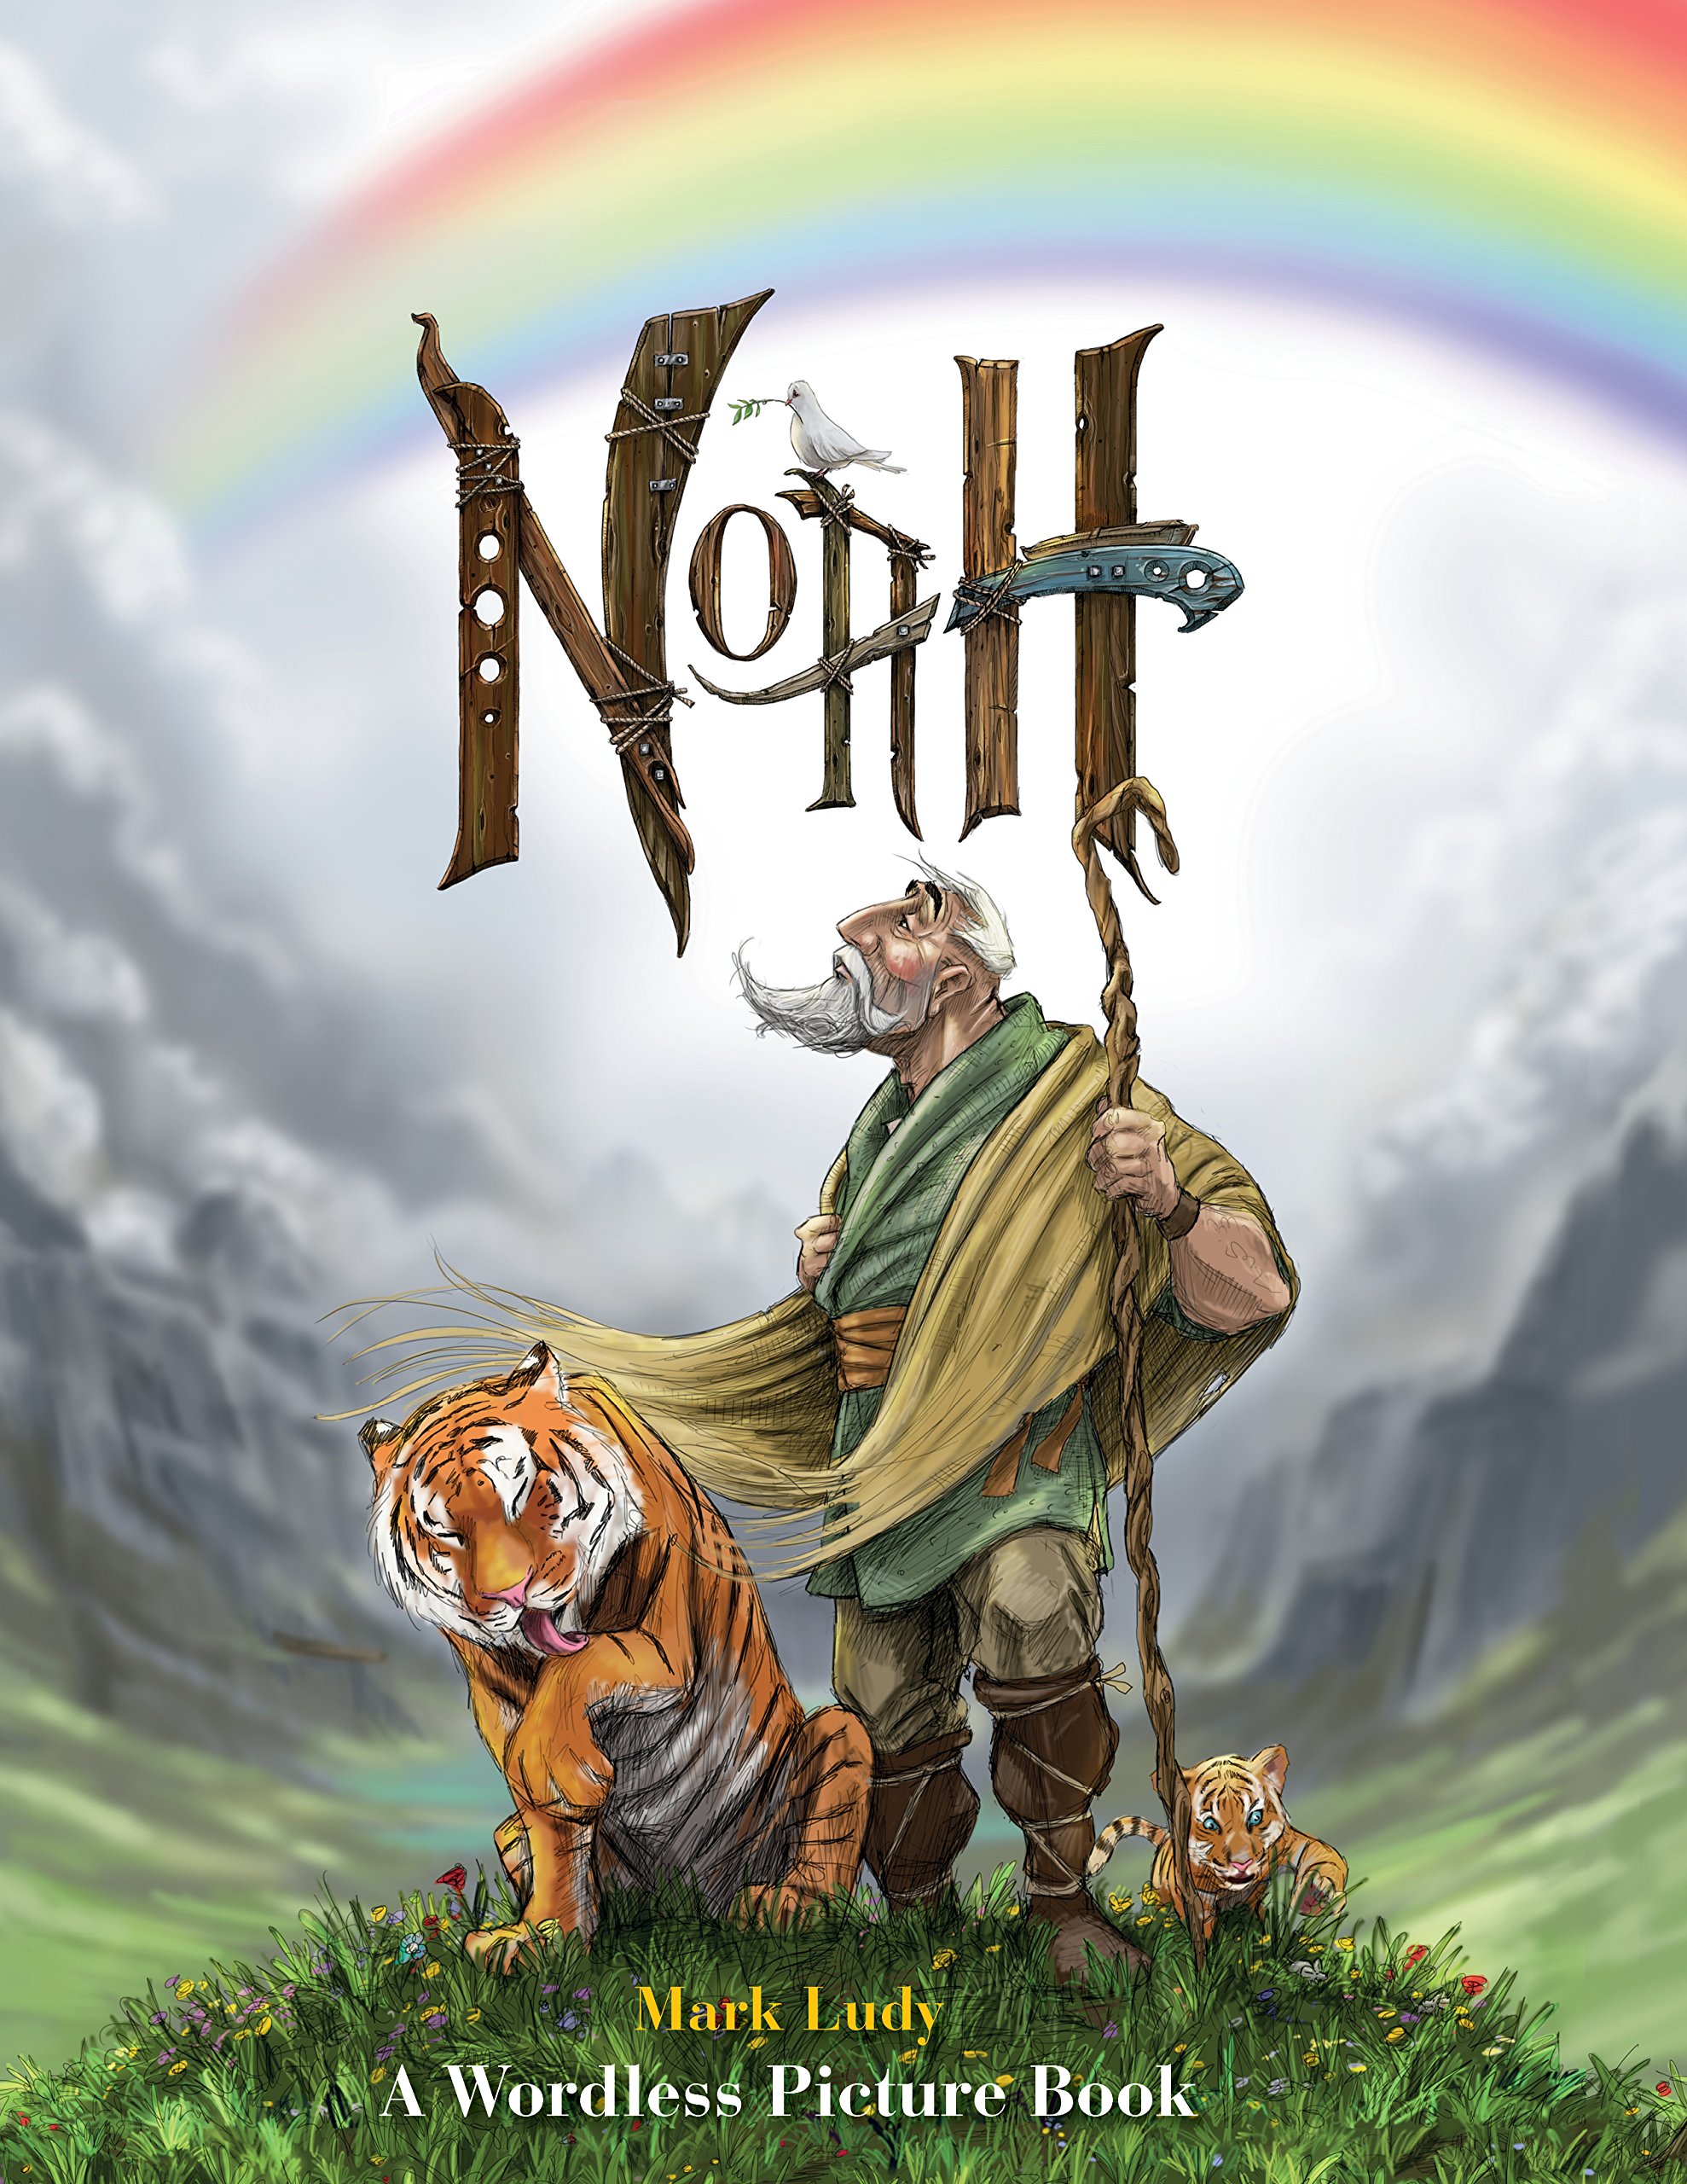 Noah: A Wordless Picture Book {Review}